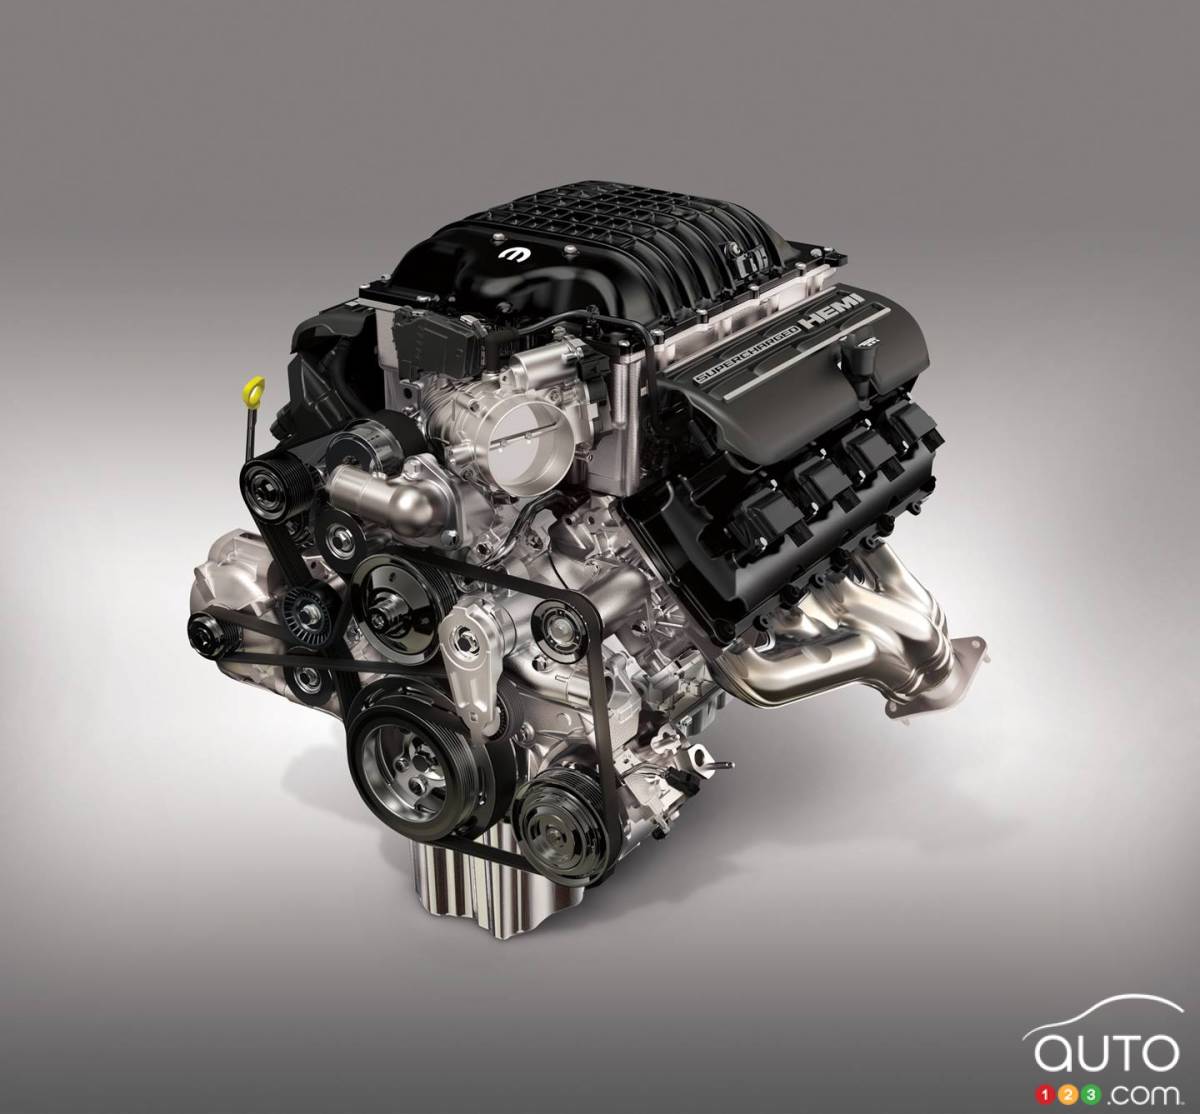 Now You can Pre-Order Your $29,995 1,000-hp HEMI Crate Engine